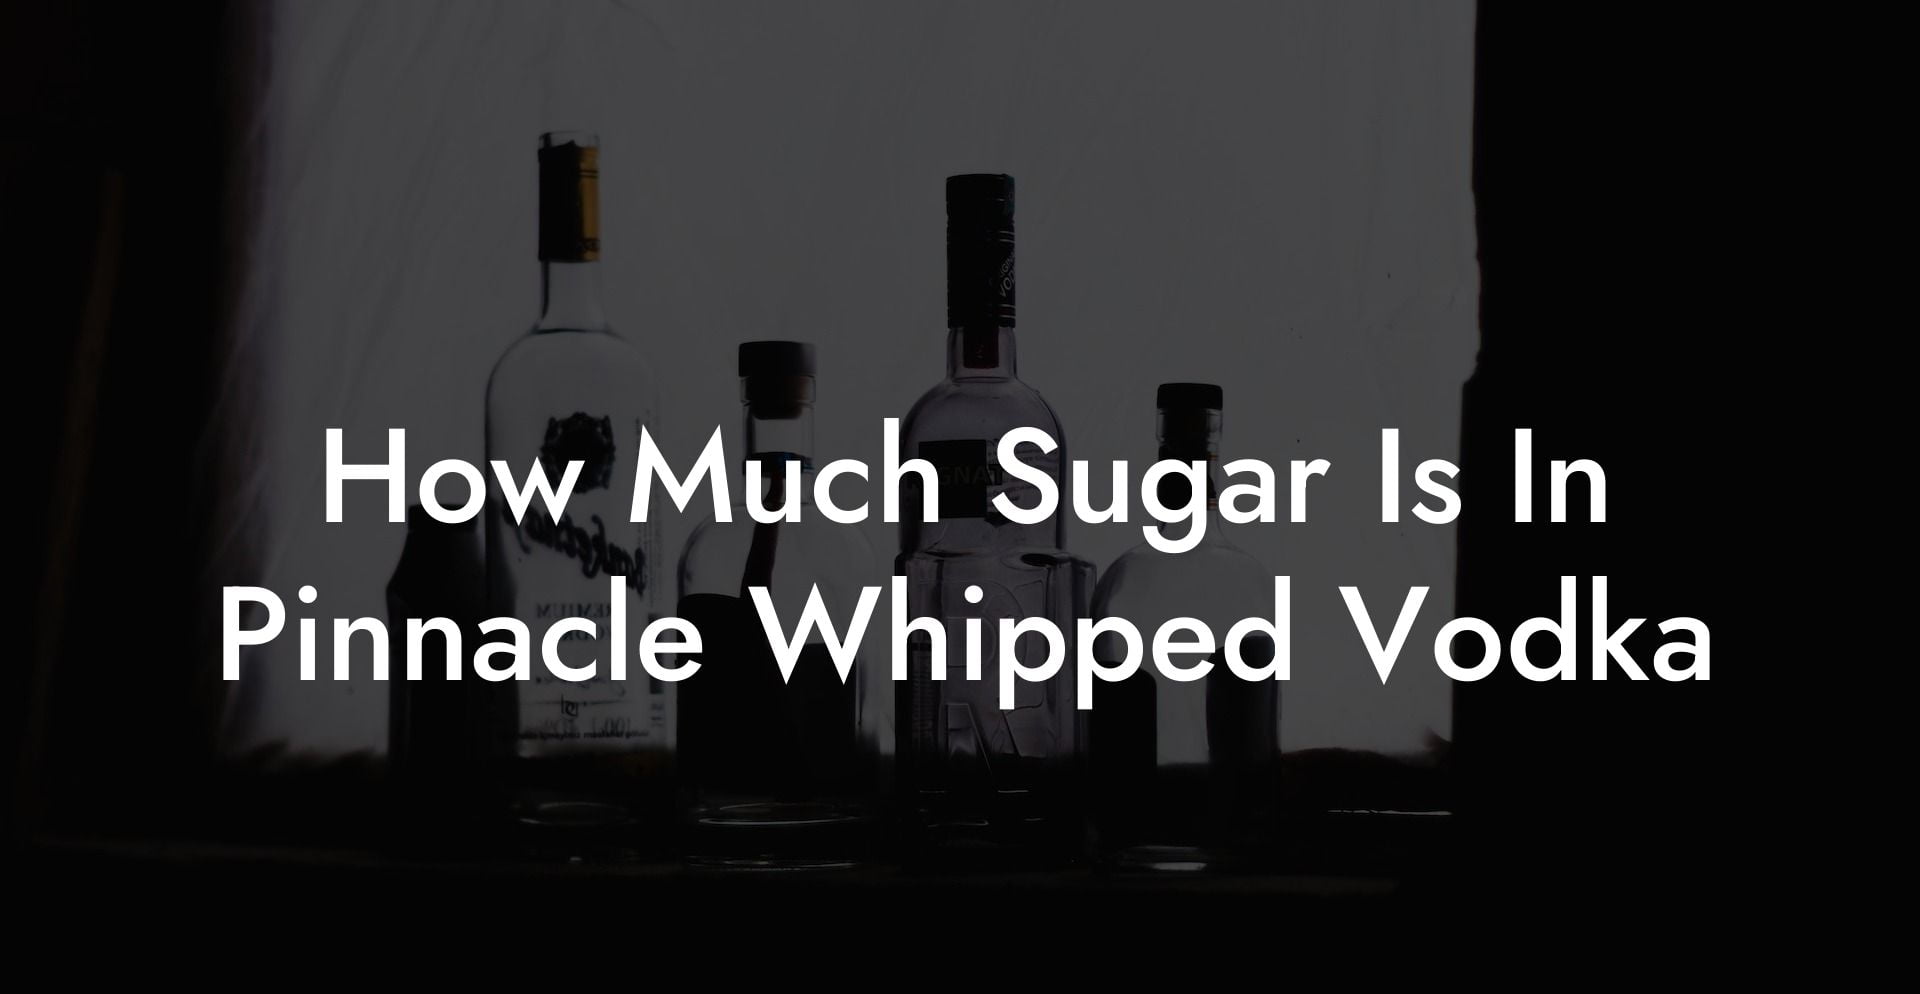 How Much Sugar Is In Pinnacle Whipped Vodka